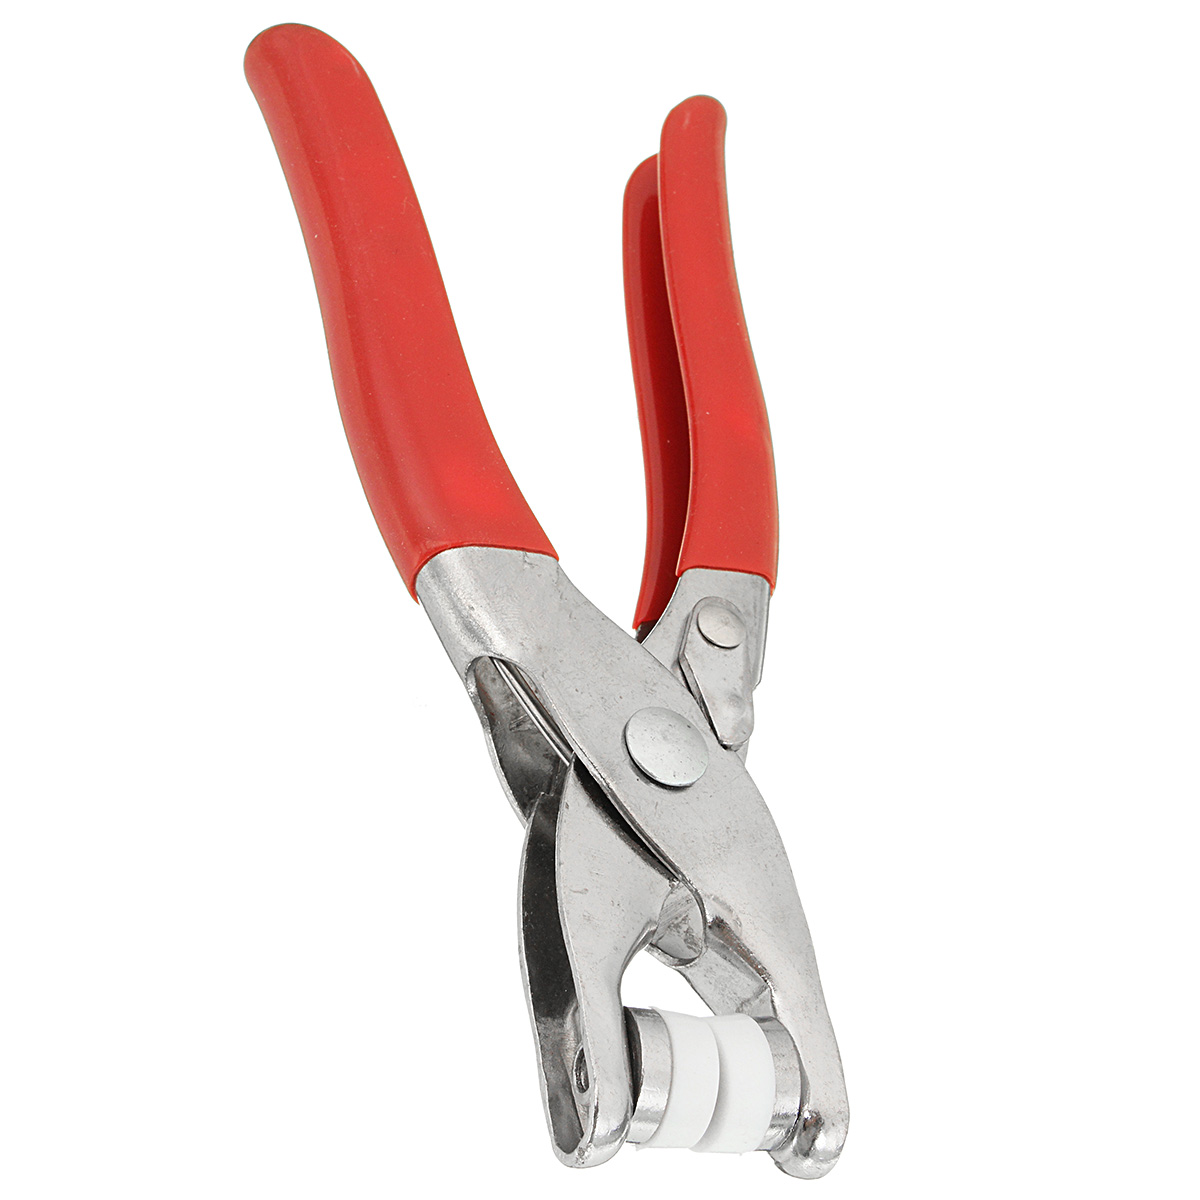 95mm-Prong-Ring-Press-Studs-Buttons-Fastener-Snap-Plier-Fixing-Tool-Craft-1093617